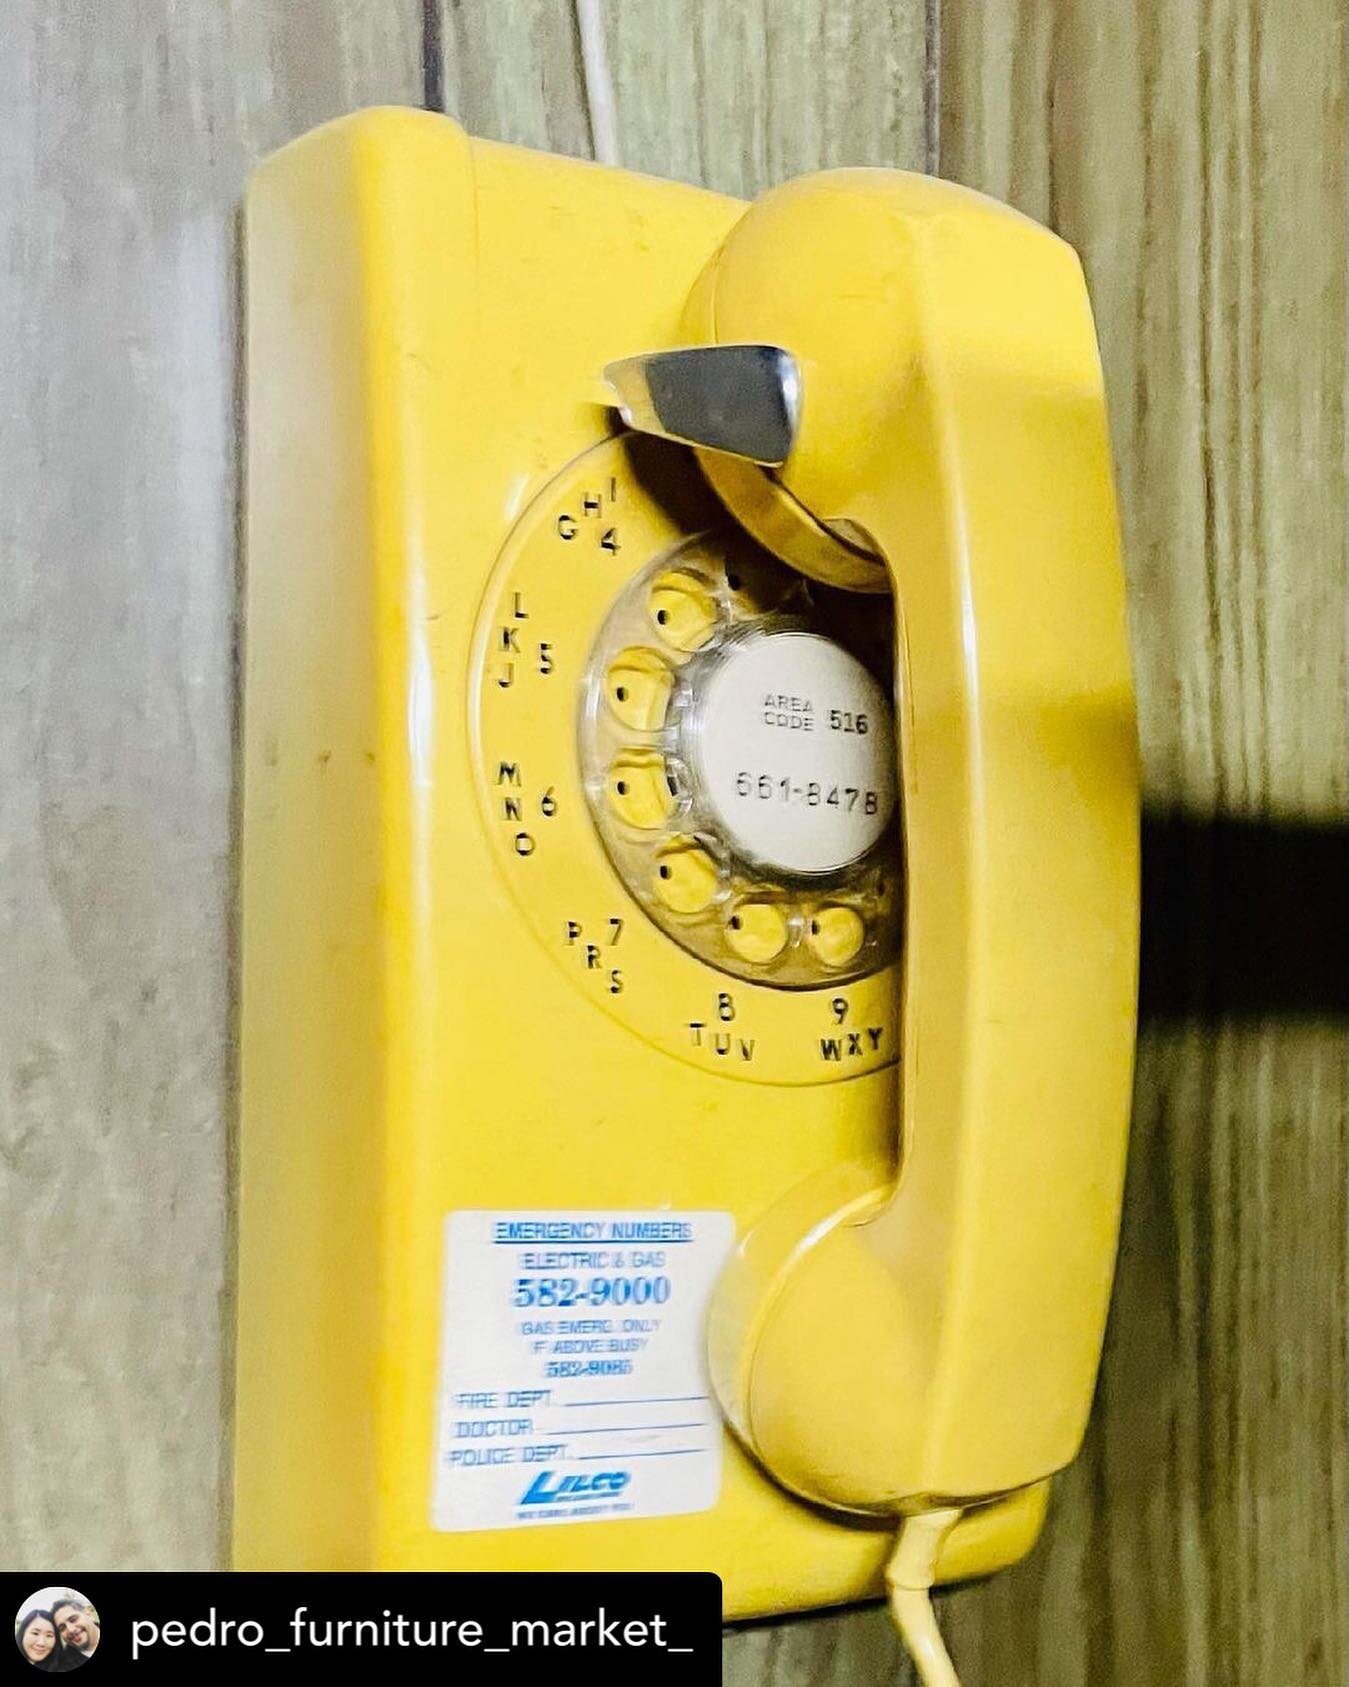 Unless you&rsquo;re not calling me from this phone, send a text. 🟡

But for real, this phone is for sale via @pedro_furniture_market_  in queens!
🤩

#callmeMaybe #jk #plsText #yellowtape #yellow #truecrime